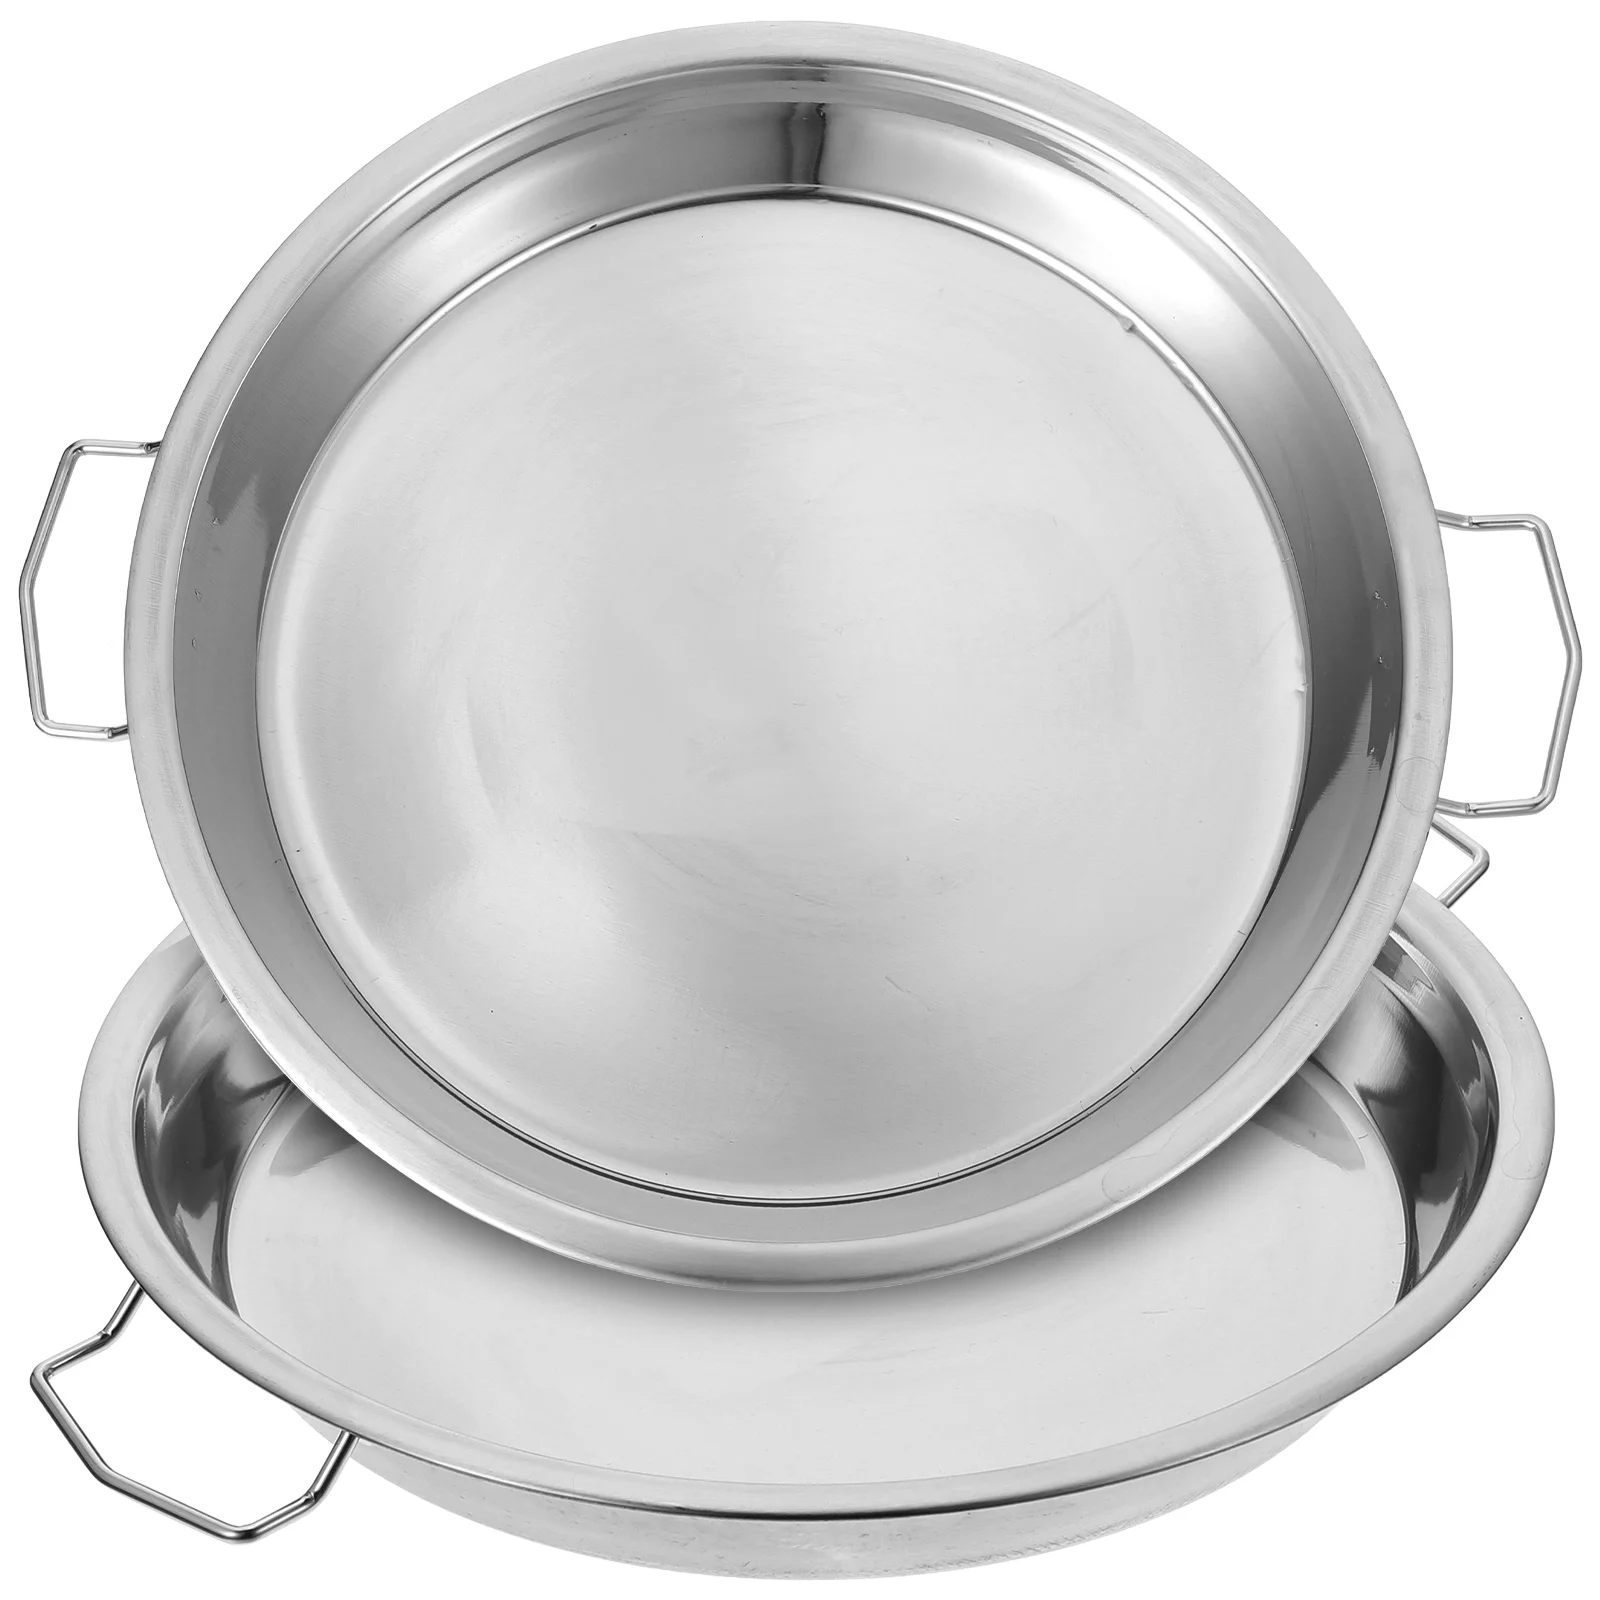 

Plate Steel Stainless Tray Steaming Pan Steamer Round Metal Pot Serving Dish Noodle Steamed Food Rice Rack Cake Platter Steam